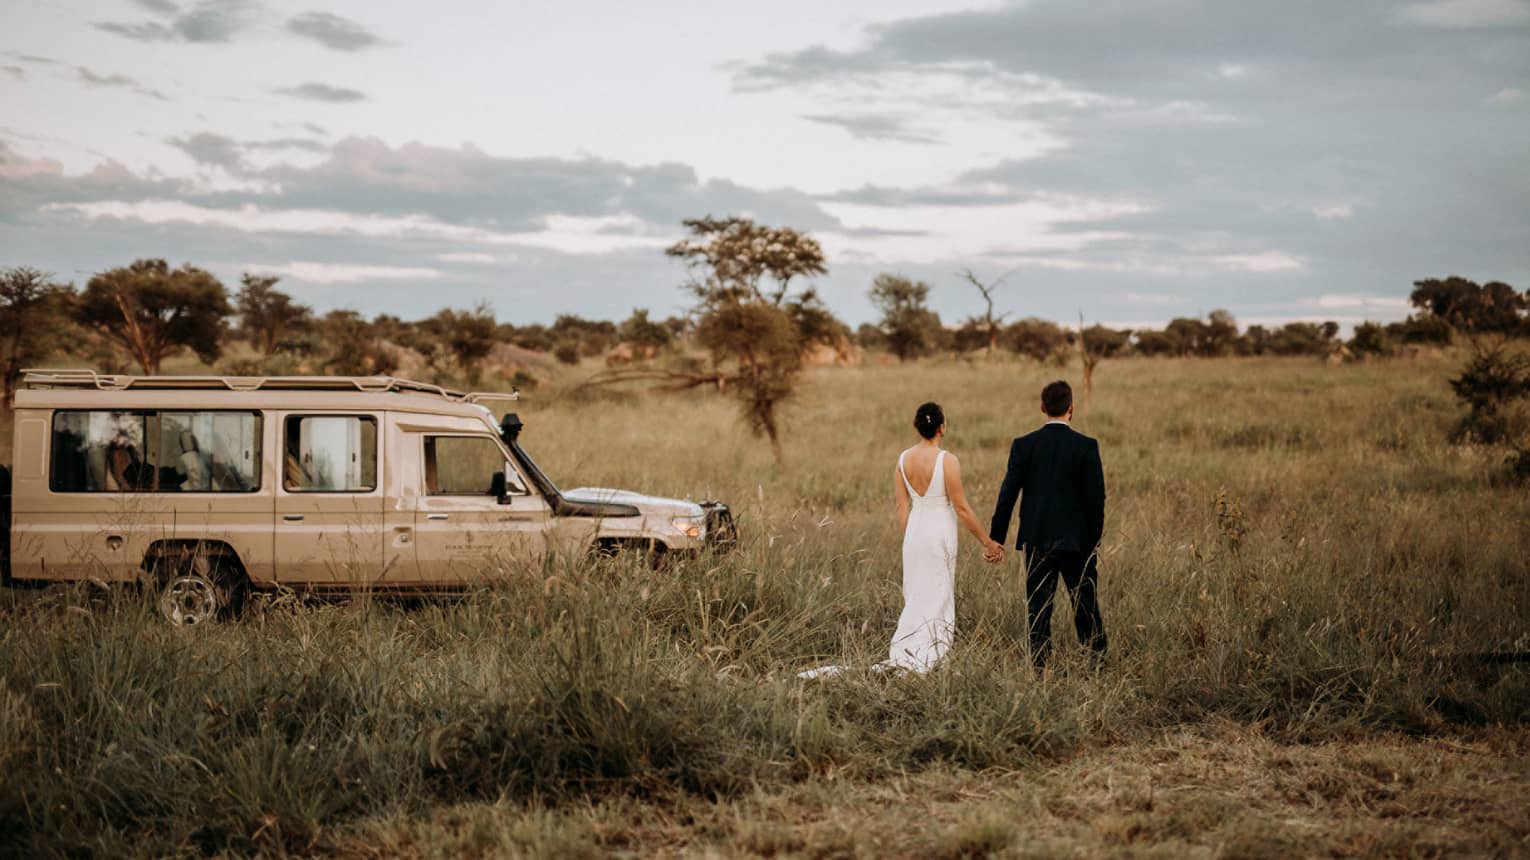 Rear view of bride and groom standing in Serengeti bushland, safari truck on left